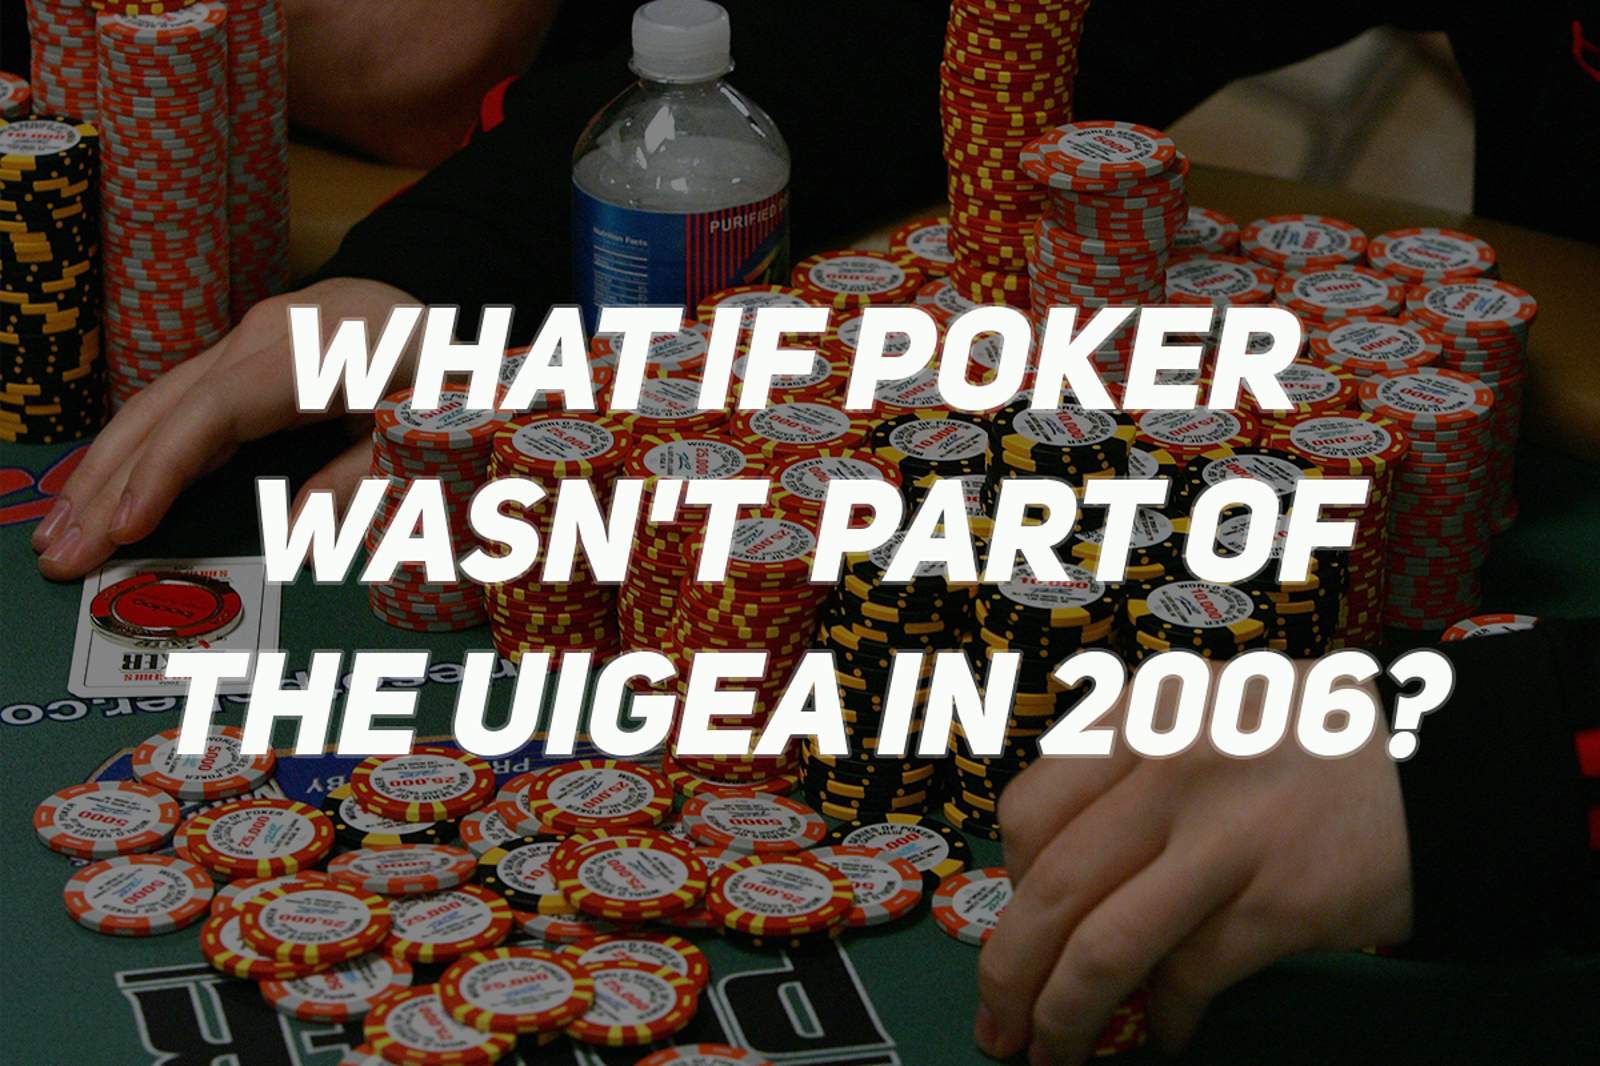 What If Poker Wasn't Part of the UIGEA Back in 2006?